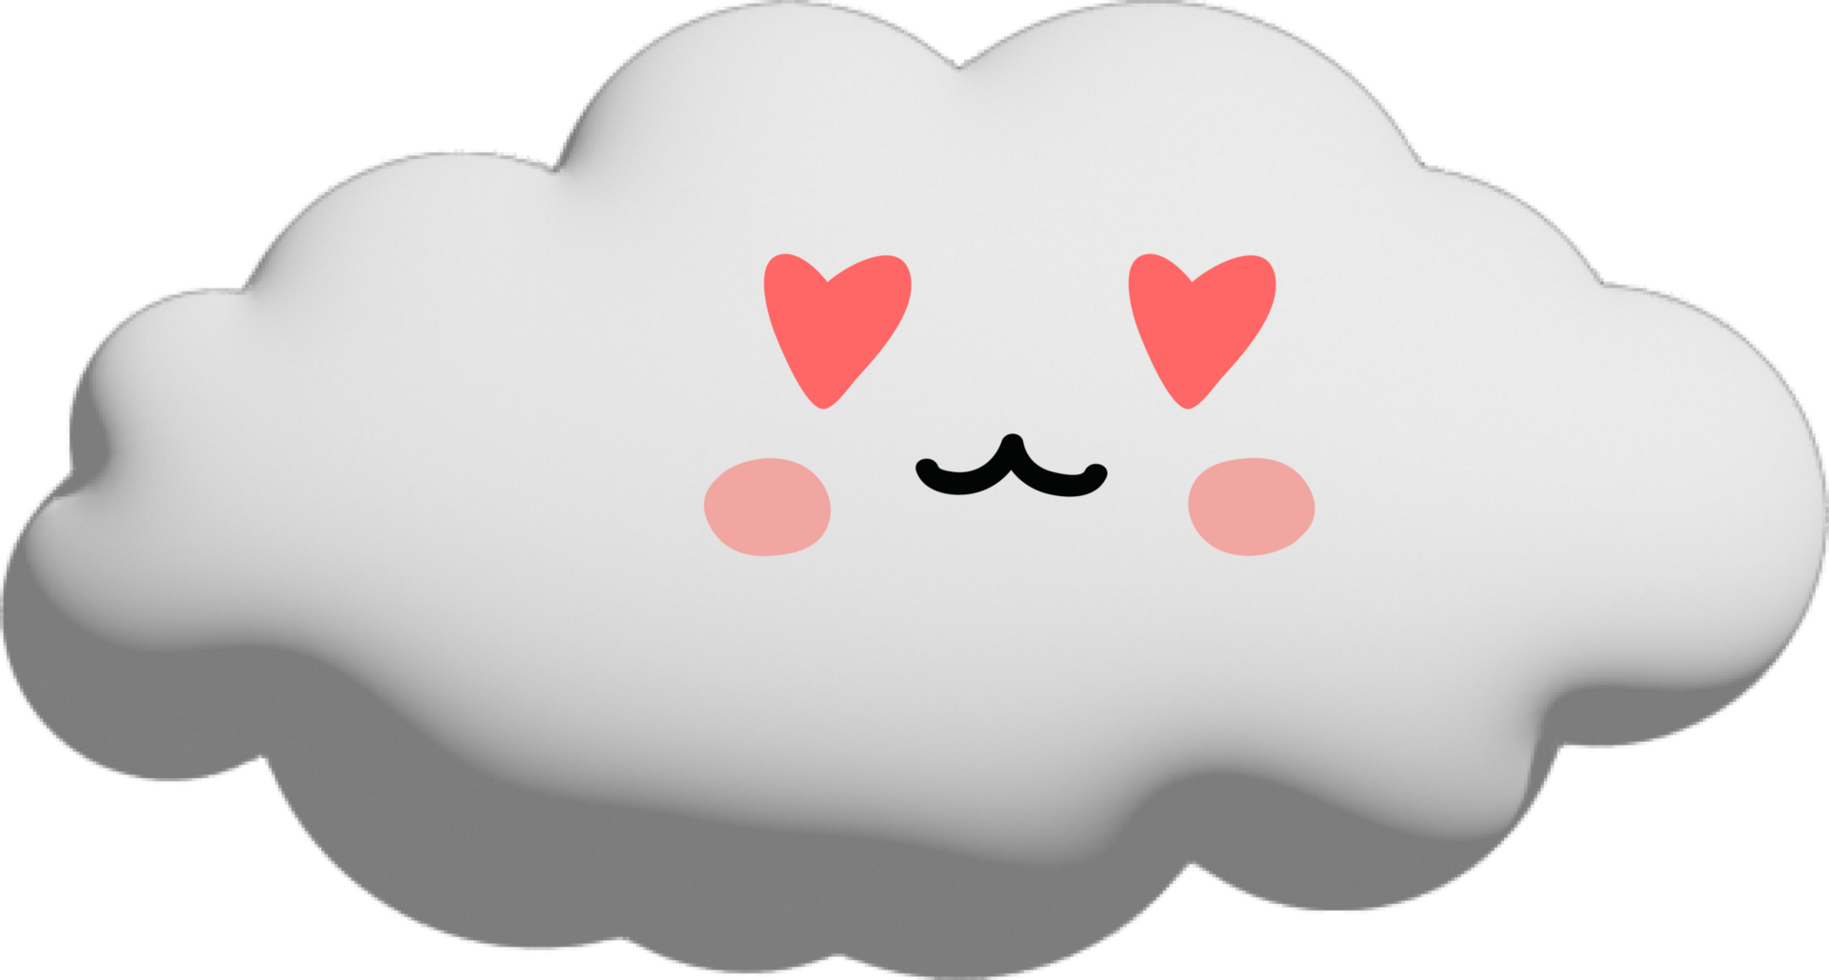 White cloud cartoon character crop-out png